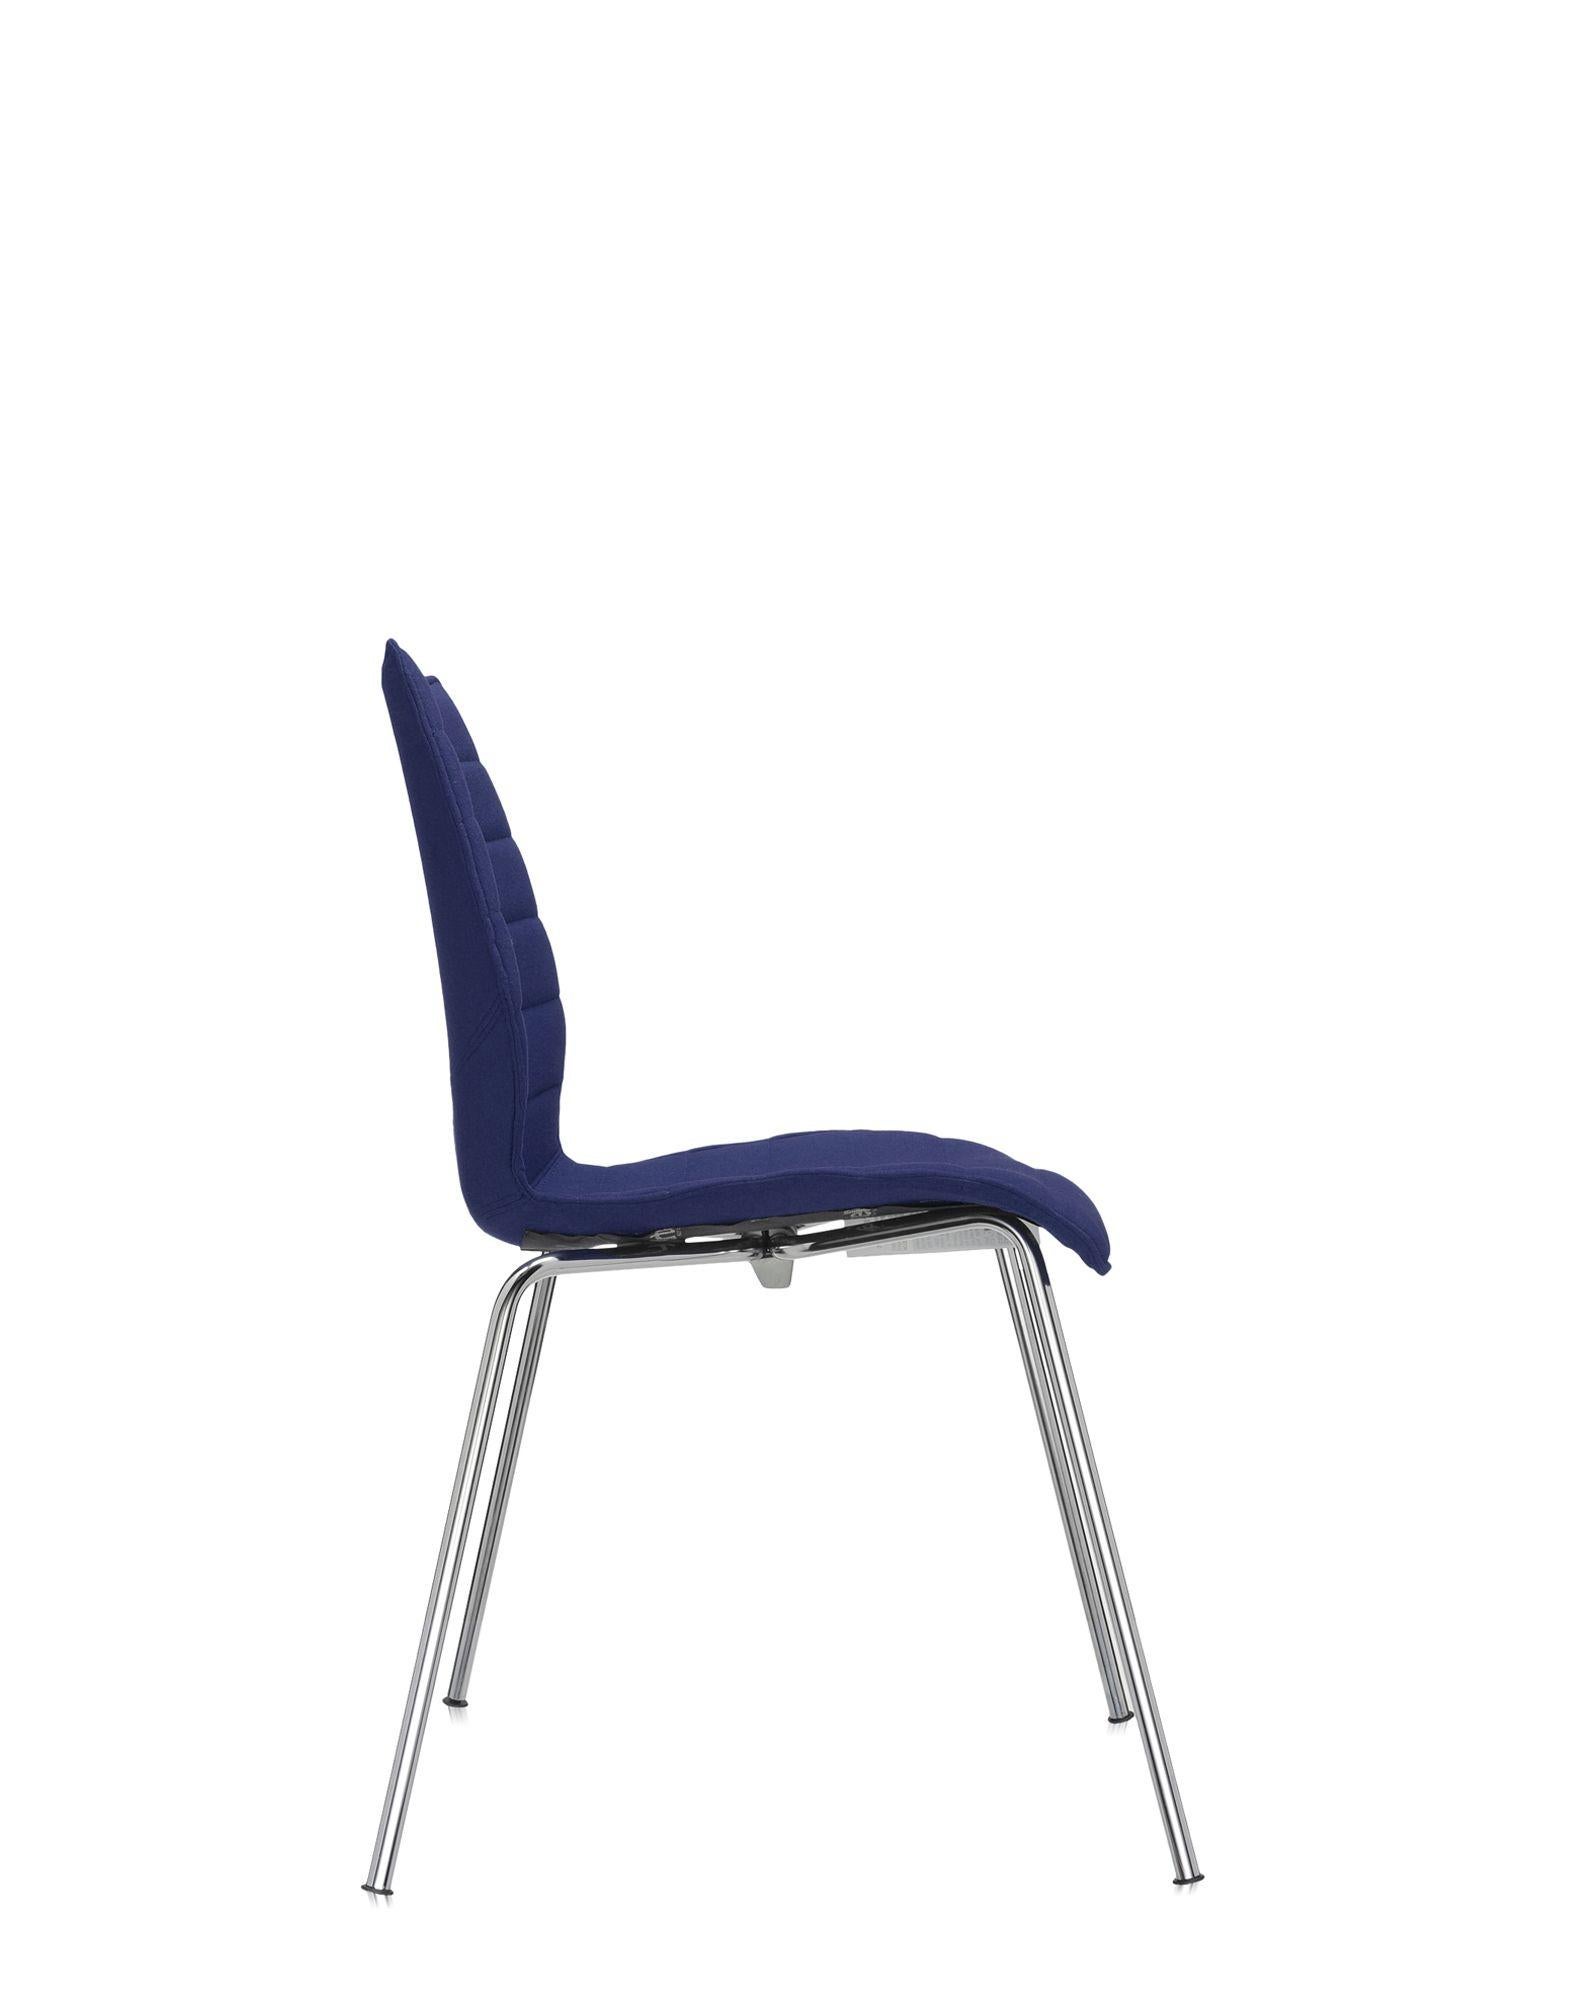 Modern Set of 2 Kartell Maui Soft Trevira Chair in Blue by Vico Magistretti